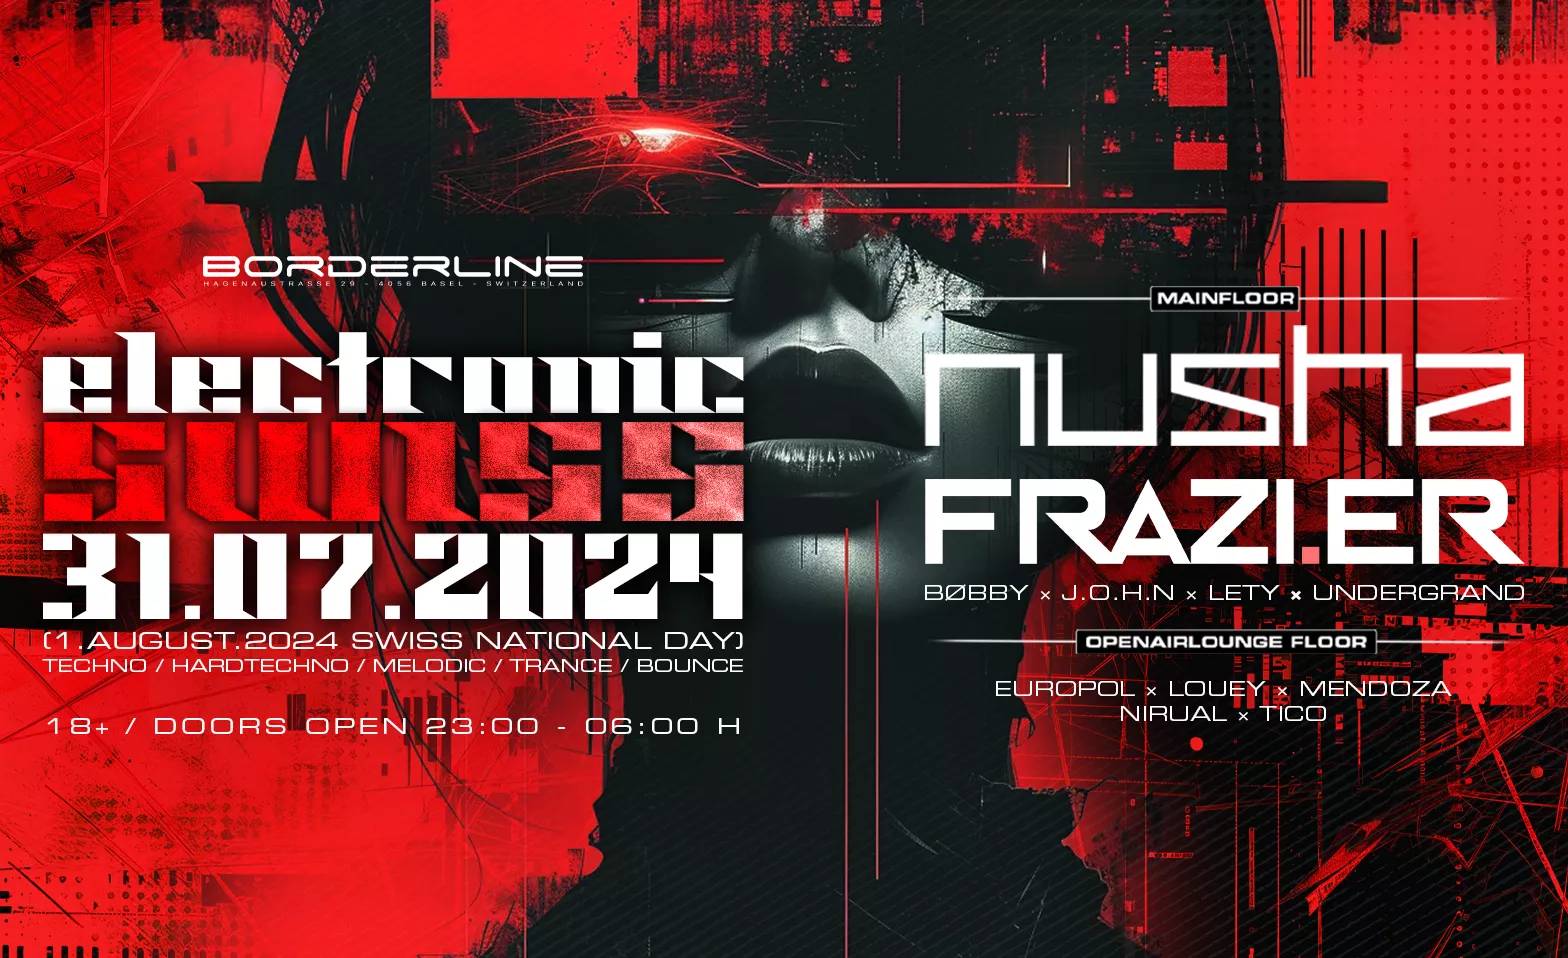 Event-Image for 'Electronic Swiss'